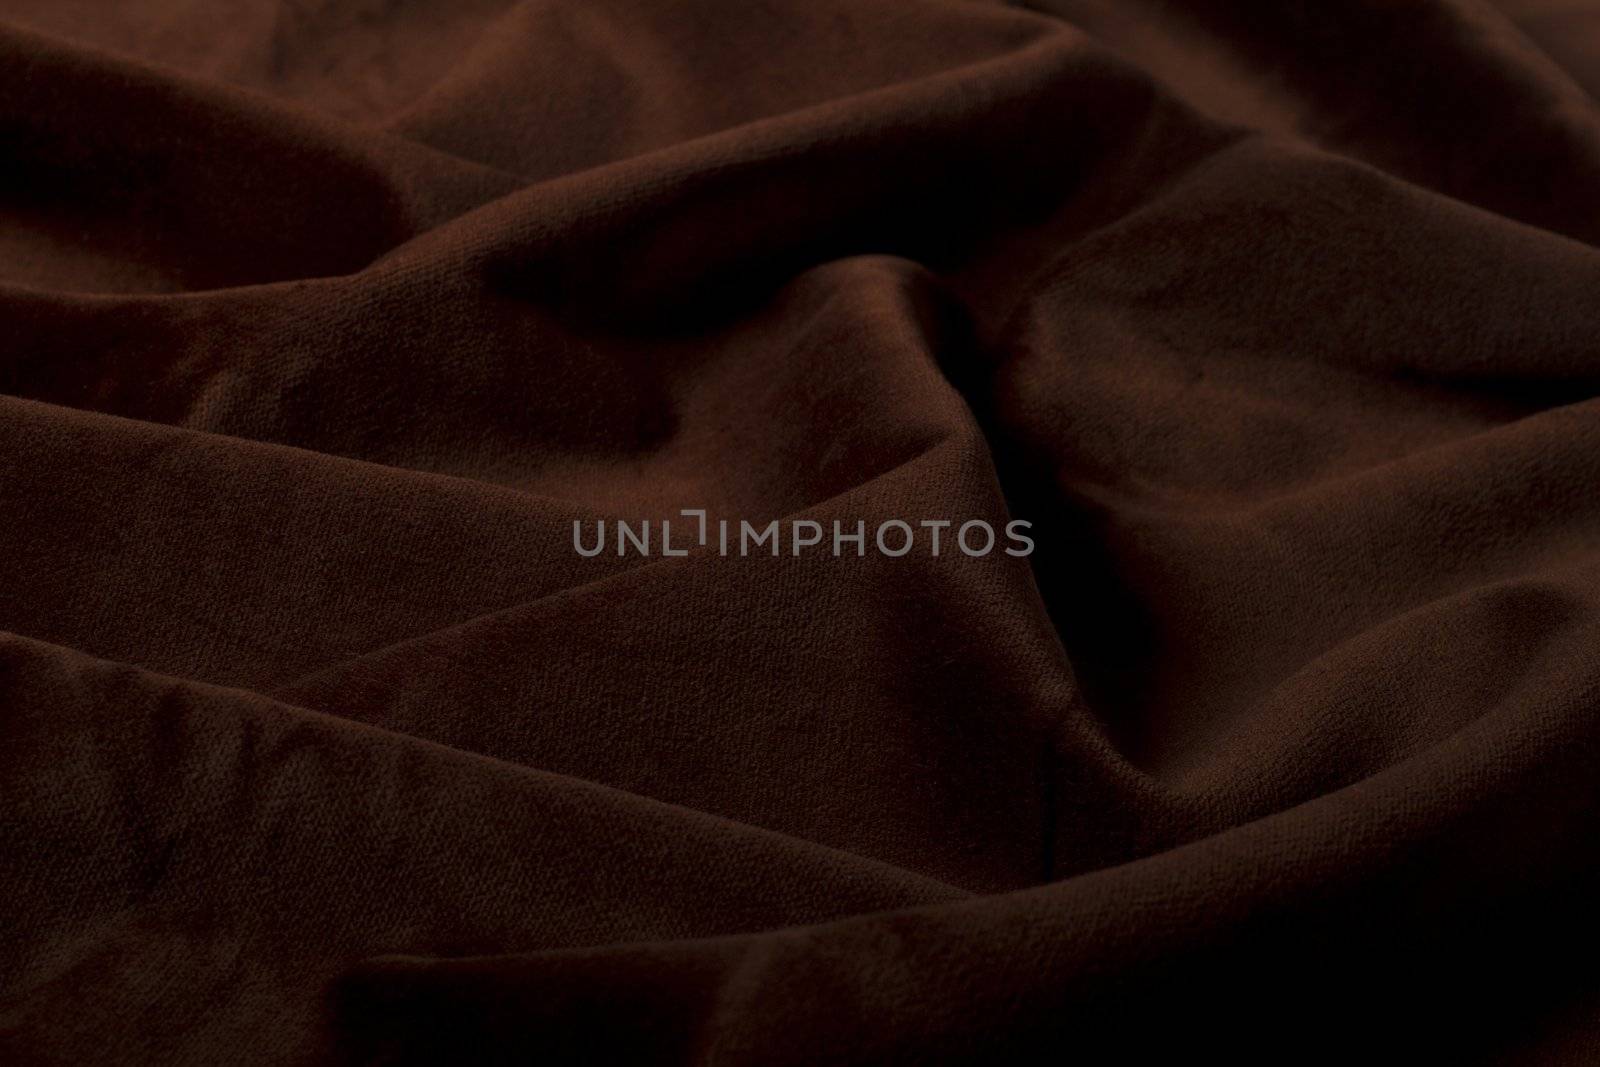 Close up view of a wrinkled dark brown silk fabric background.